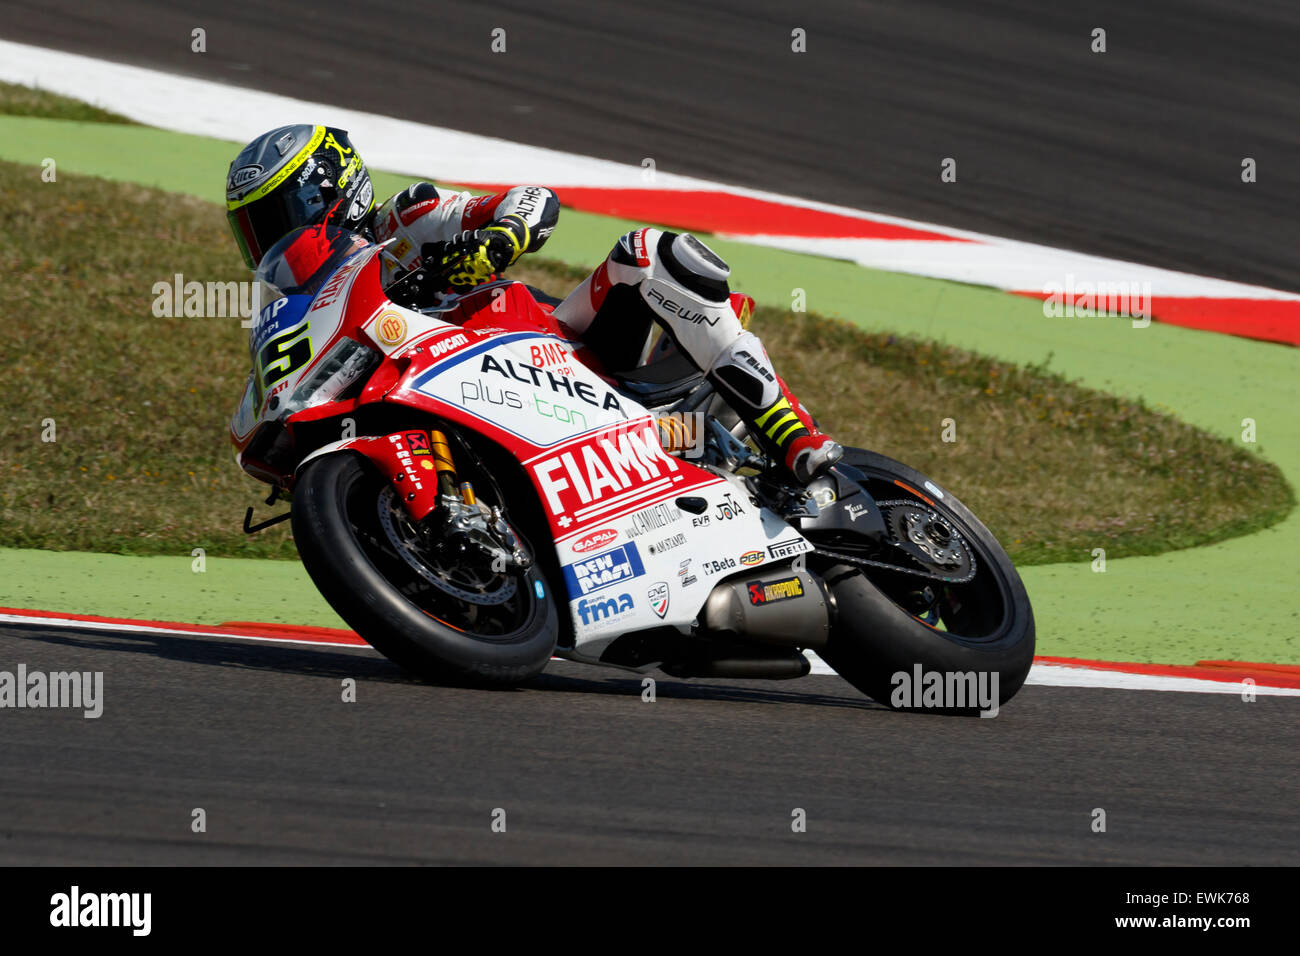 Misano Adriatico, Italy - June 20, 2015: Ducati Panigale R of Althea Racing Team, driven by BAIOCCO Matteo Stock Photo